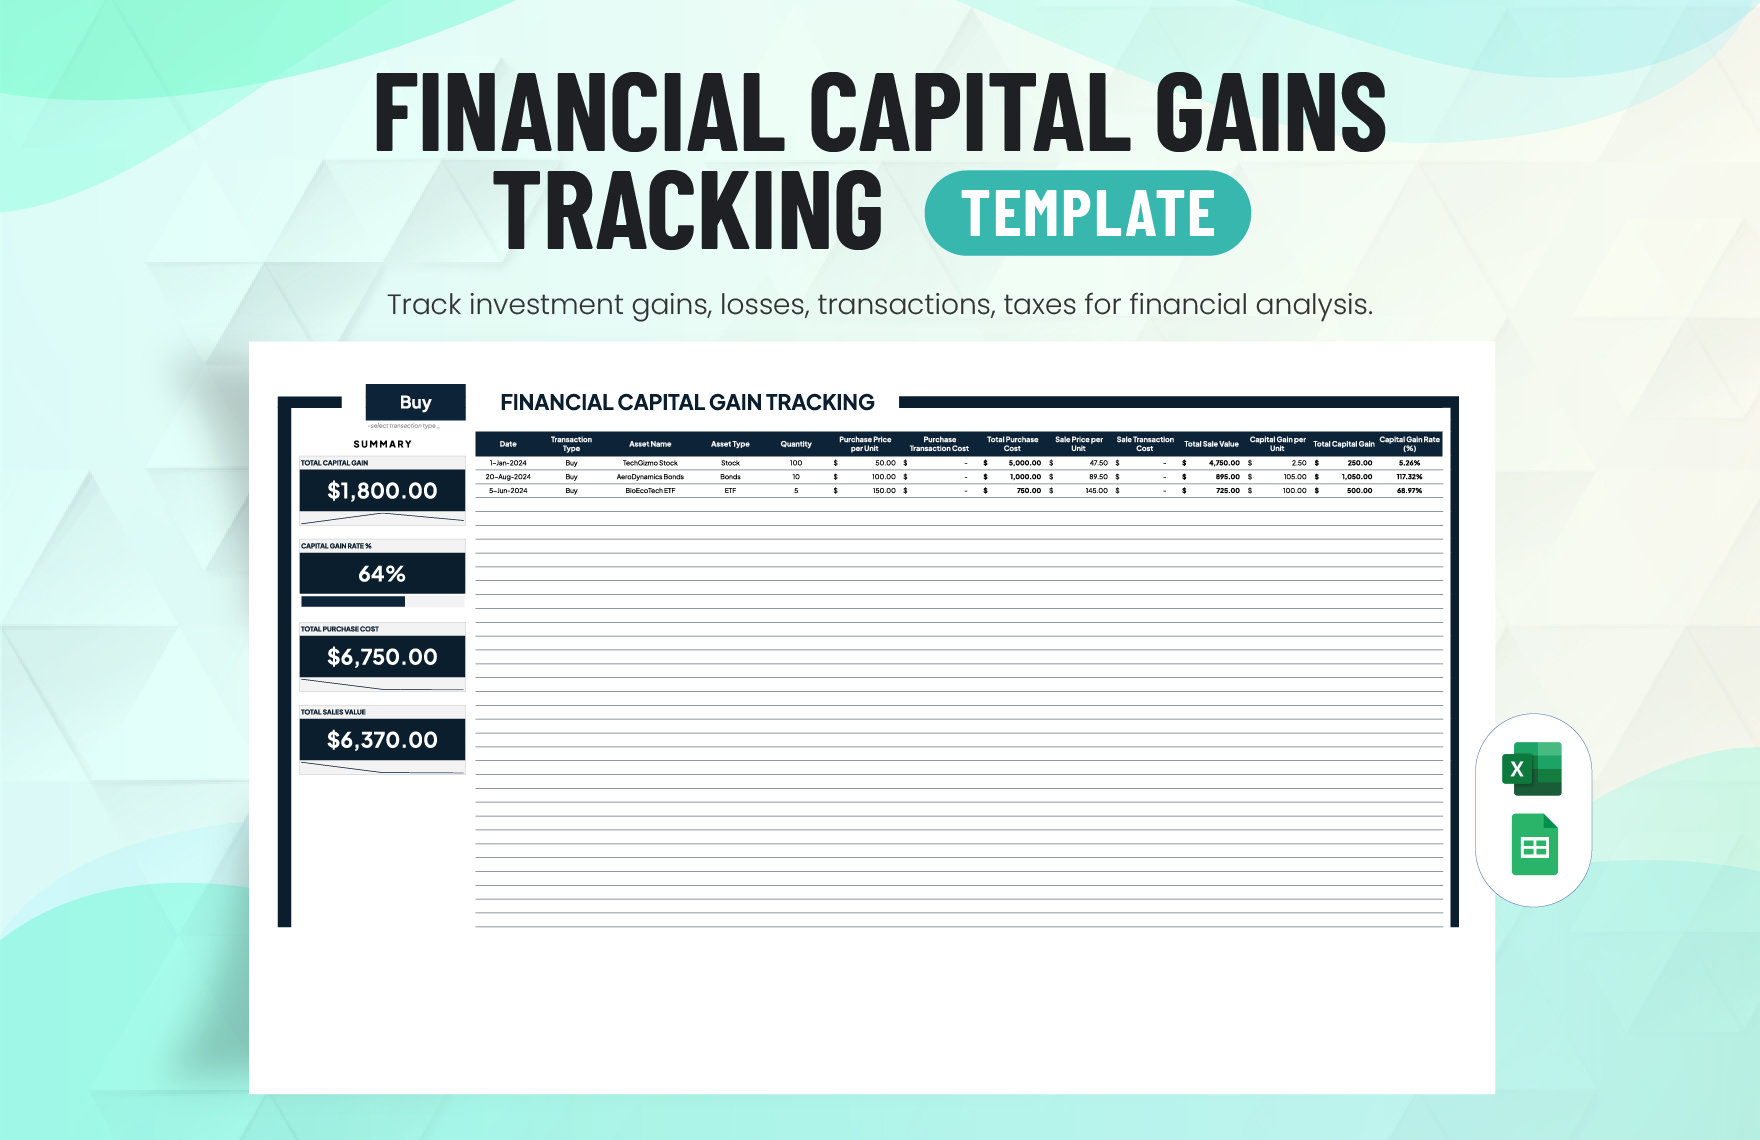 Financial Capital Gains Tracking Template